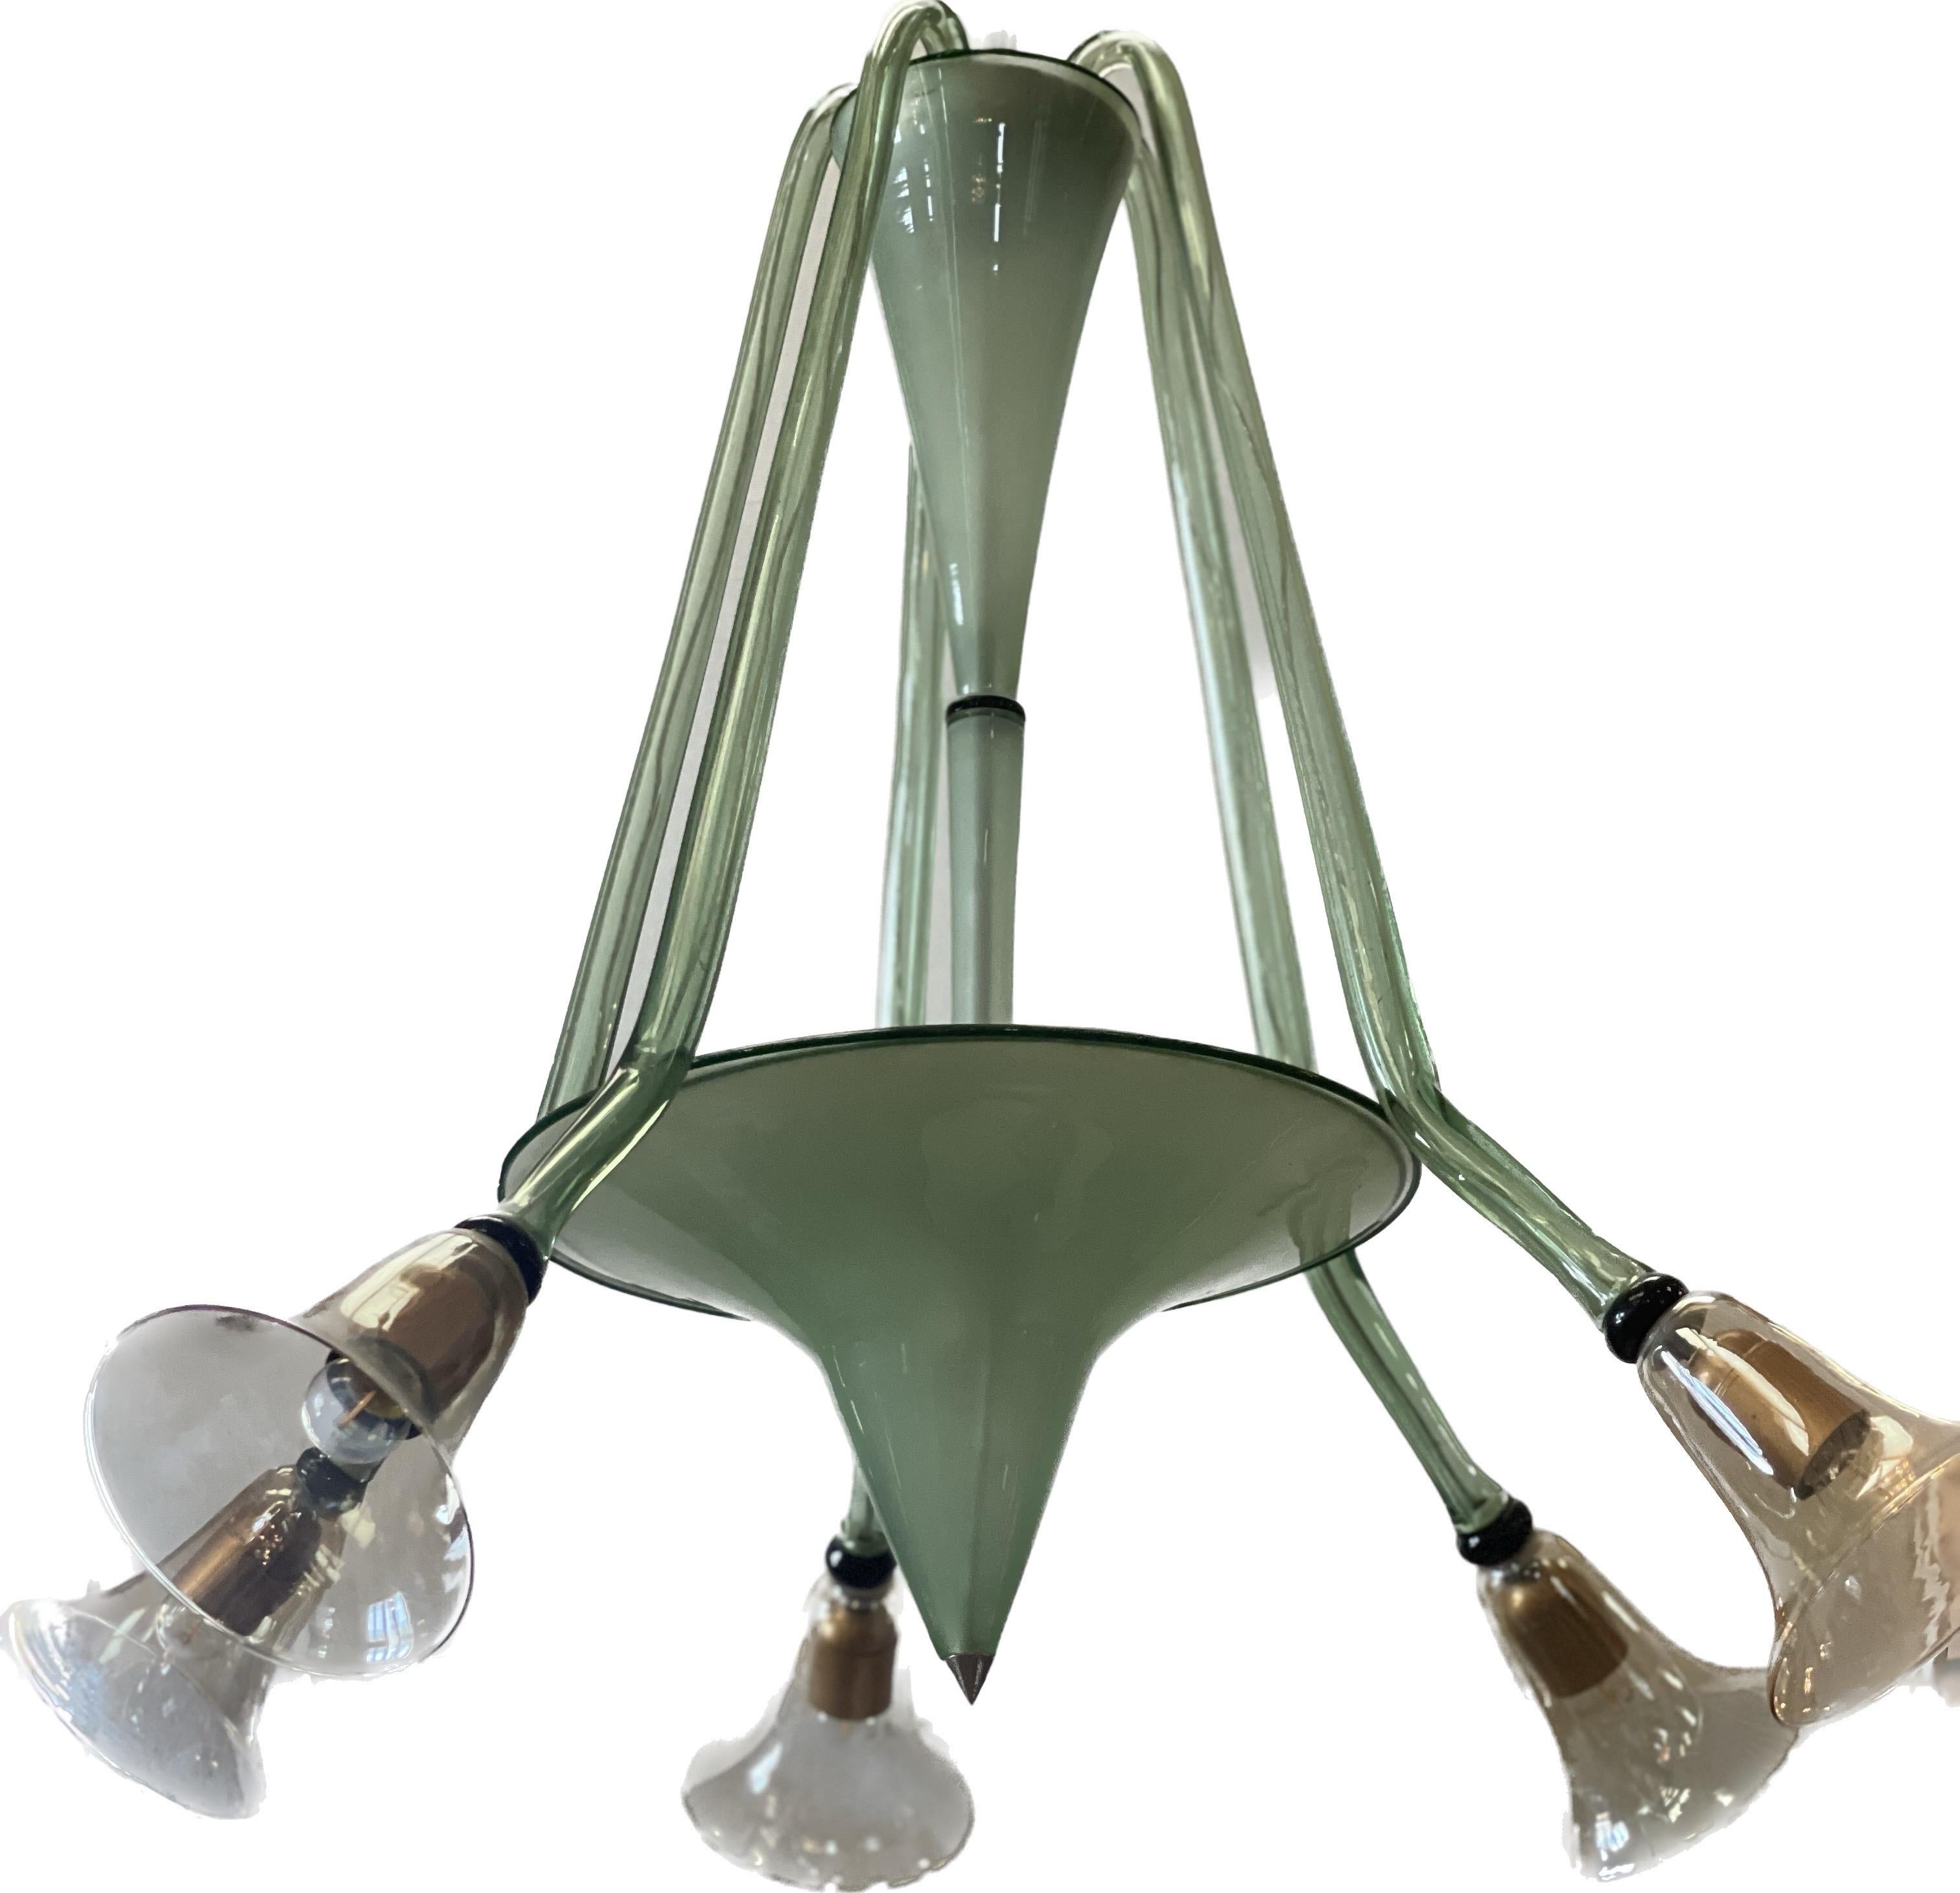 20th Century Murano Glass Fratelli Toso Pendant Chandelier With 5 Arms For Sale